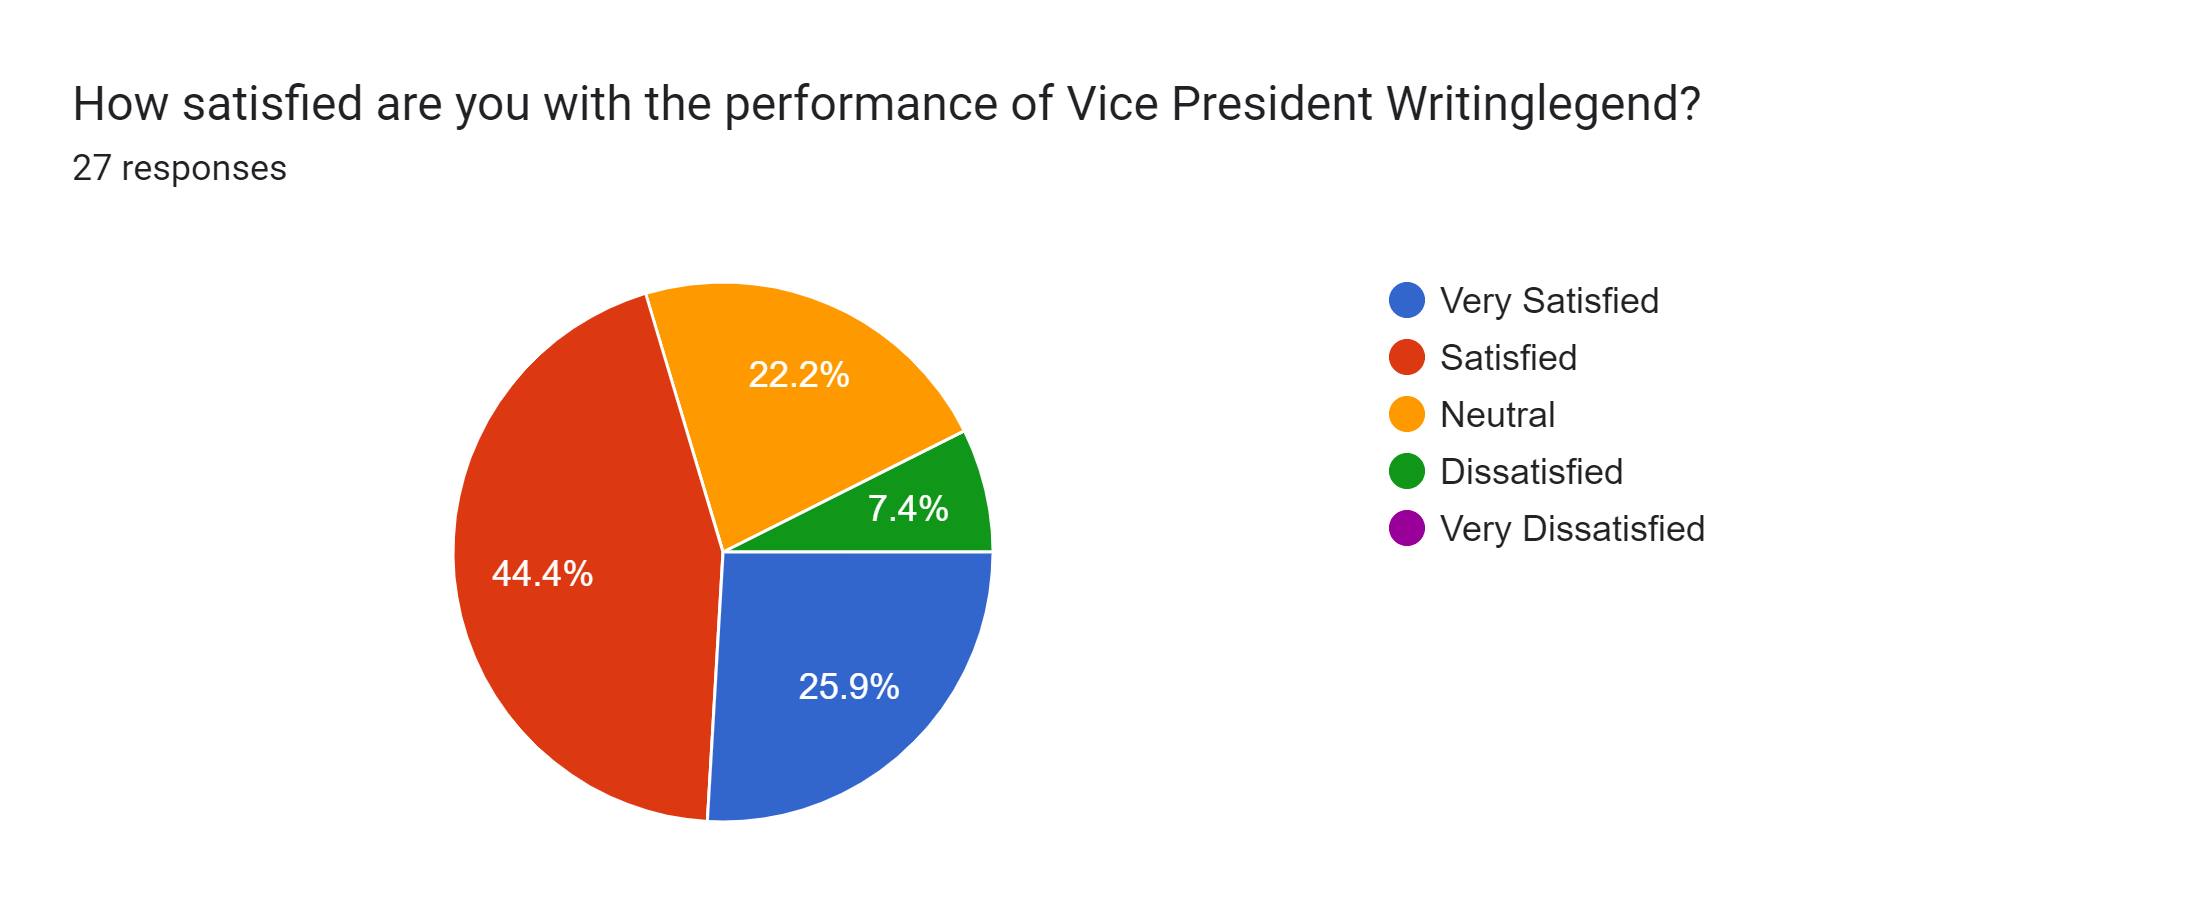 Forms response chart. Question title: How satisfied are you with the performance of Vice President Writinglegend?. Number of responses: 27 responses.